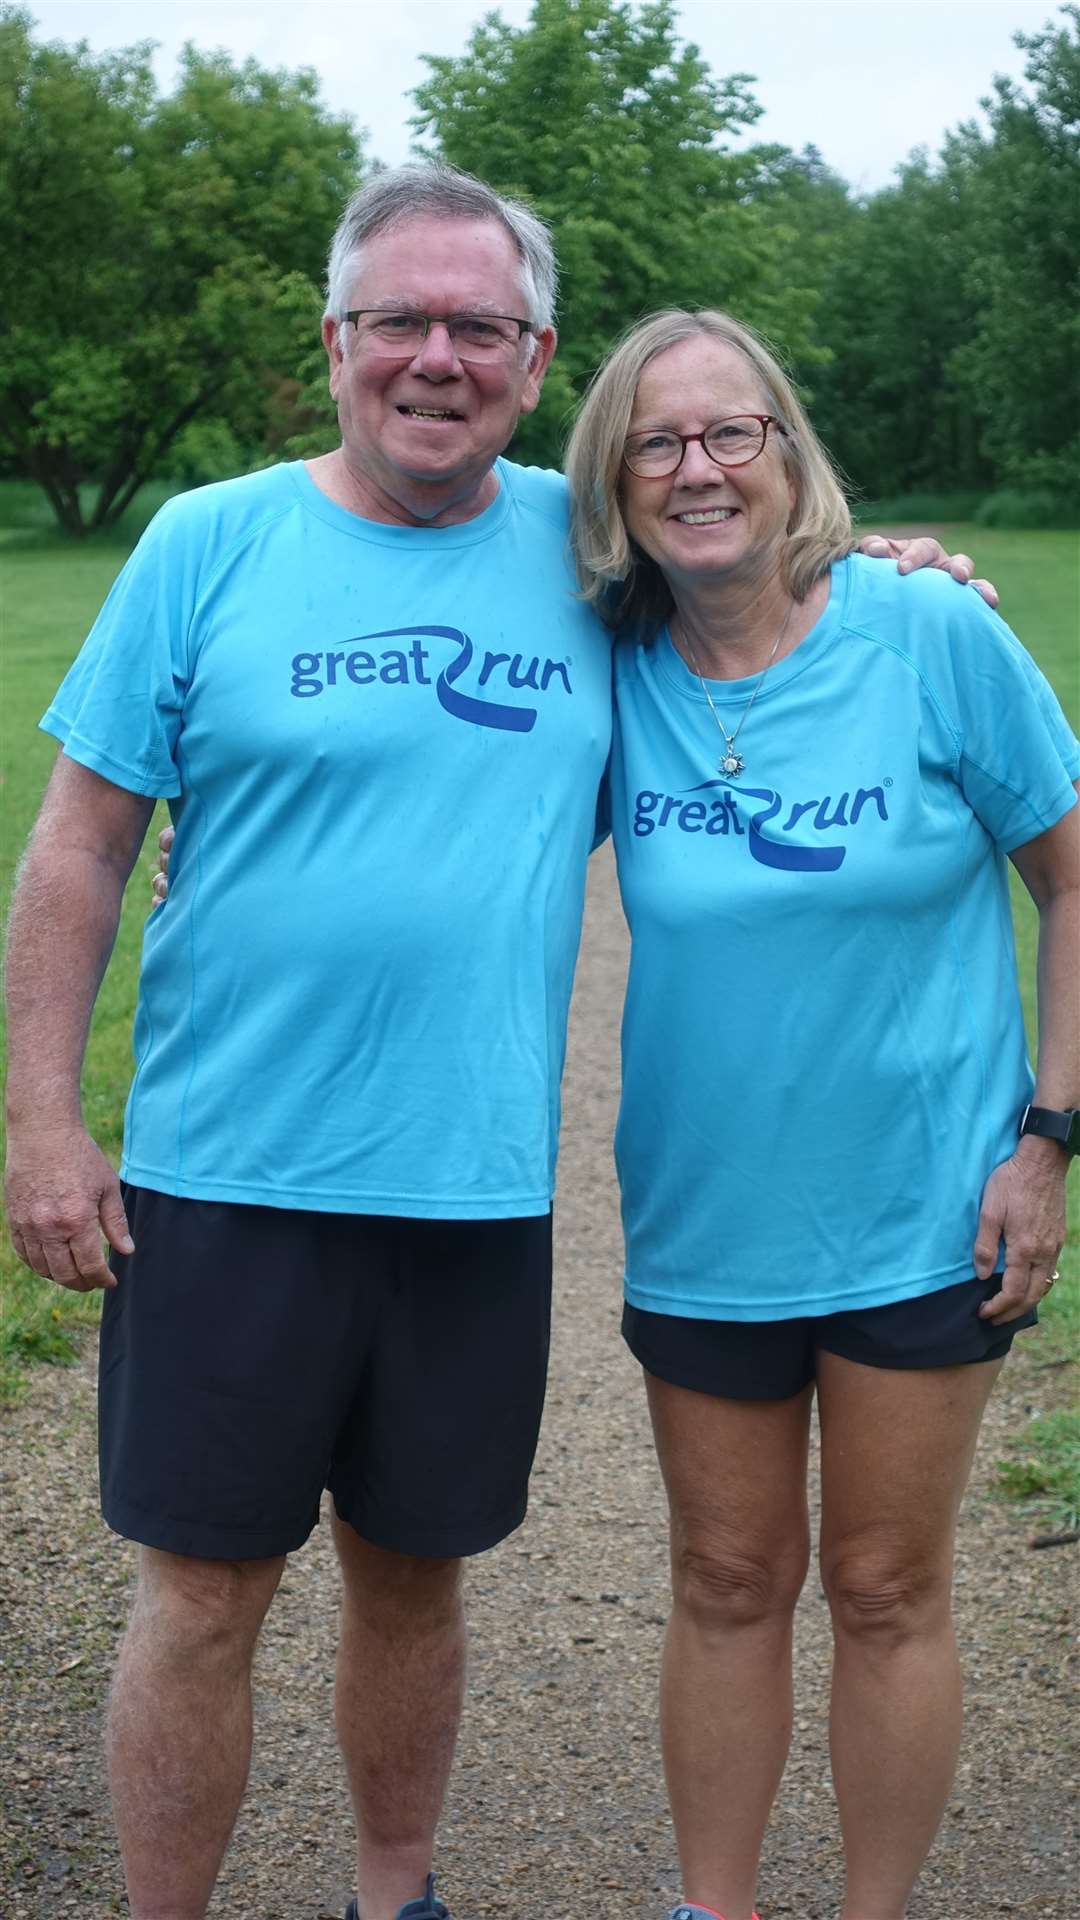 Canadians John Harper and Debra Brown are travelling from Victoria, British Columbia, to take part in the Great Run Aberdeen 10k and will travel to Portsoy to research family history.